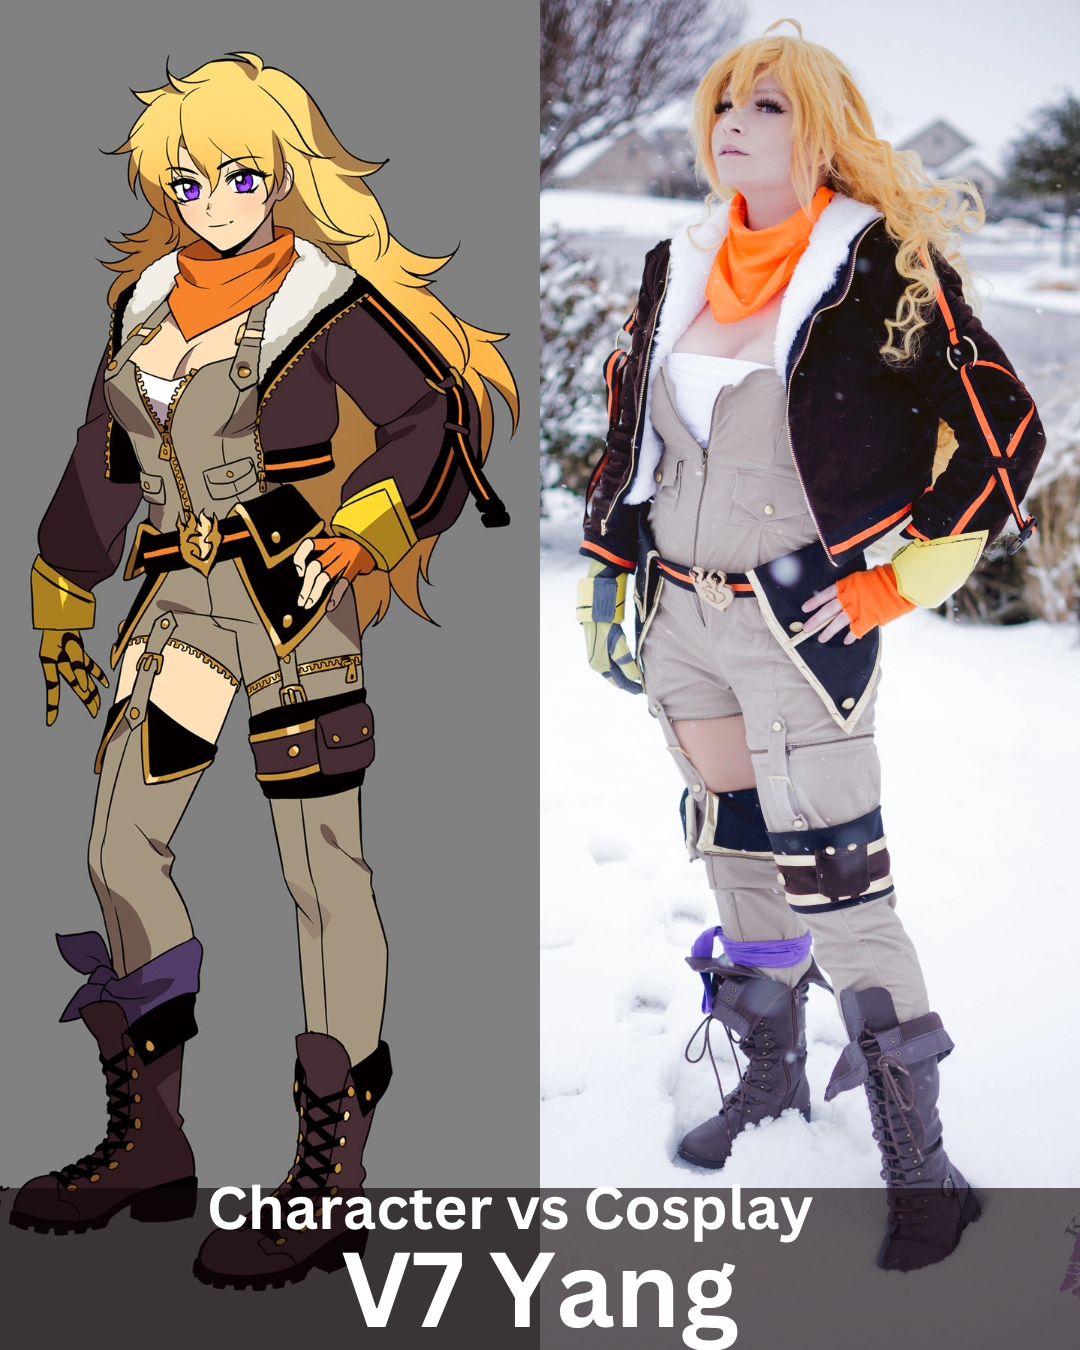 Next cosplay I made in my journey was V7 Yang! 

This was my panana project over 2020 so I took my time with this build. Making the pants actually into zip off shorts and all the pockets and pouches real. Also fully lined jacket! So happy this took home Best In Show at RTX 2023 (rip) 

I got to shoot her in the crazy snow we had in early 2021. 

Which of my Yangs is your favorite? 

#cosplay #cosplayer #yang #yangcosplay #yangxiaolongcosplay #yangxiaolong #rwby #rwbycosplay